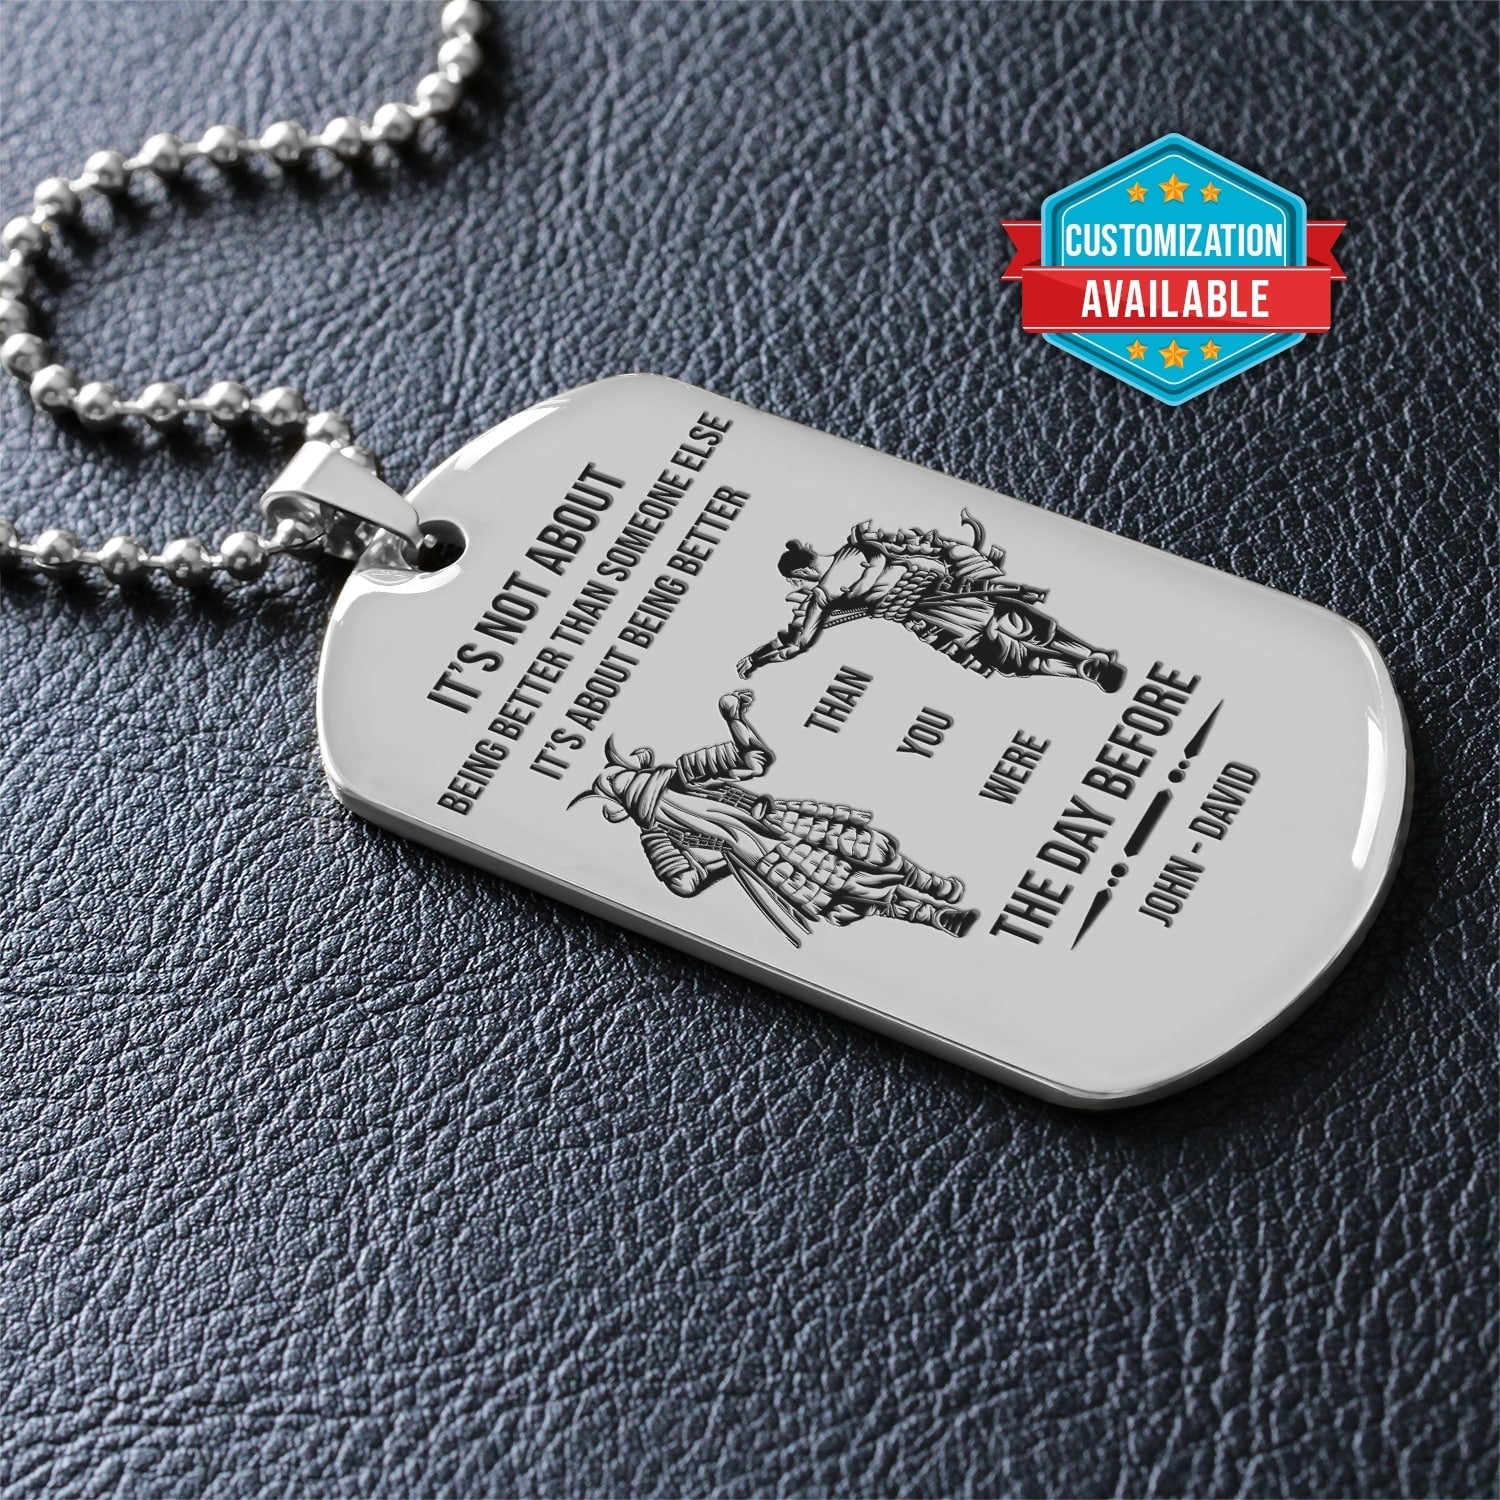 SAD060 - Call On Me Brother - It's About Being Better Than You Were The Day Before - Samurai - Bushido - Katana - Ronin - Miyamoto Musashi - Silver Double-Sided Dog Tag